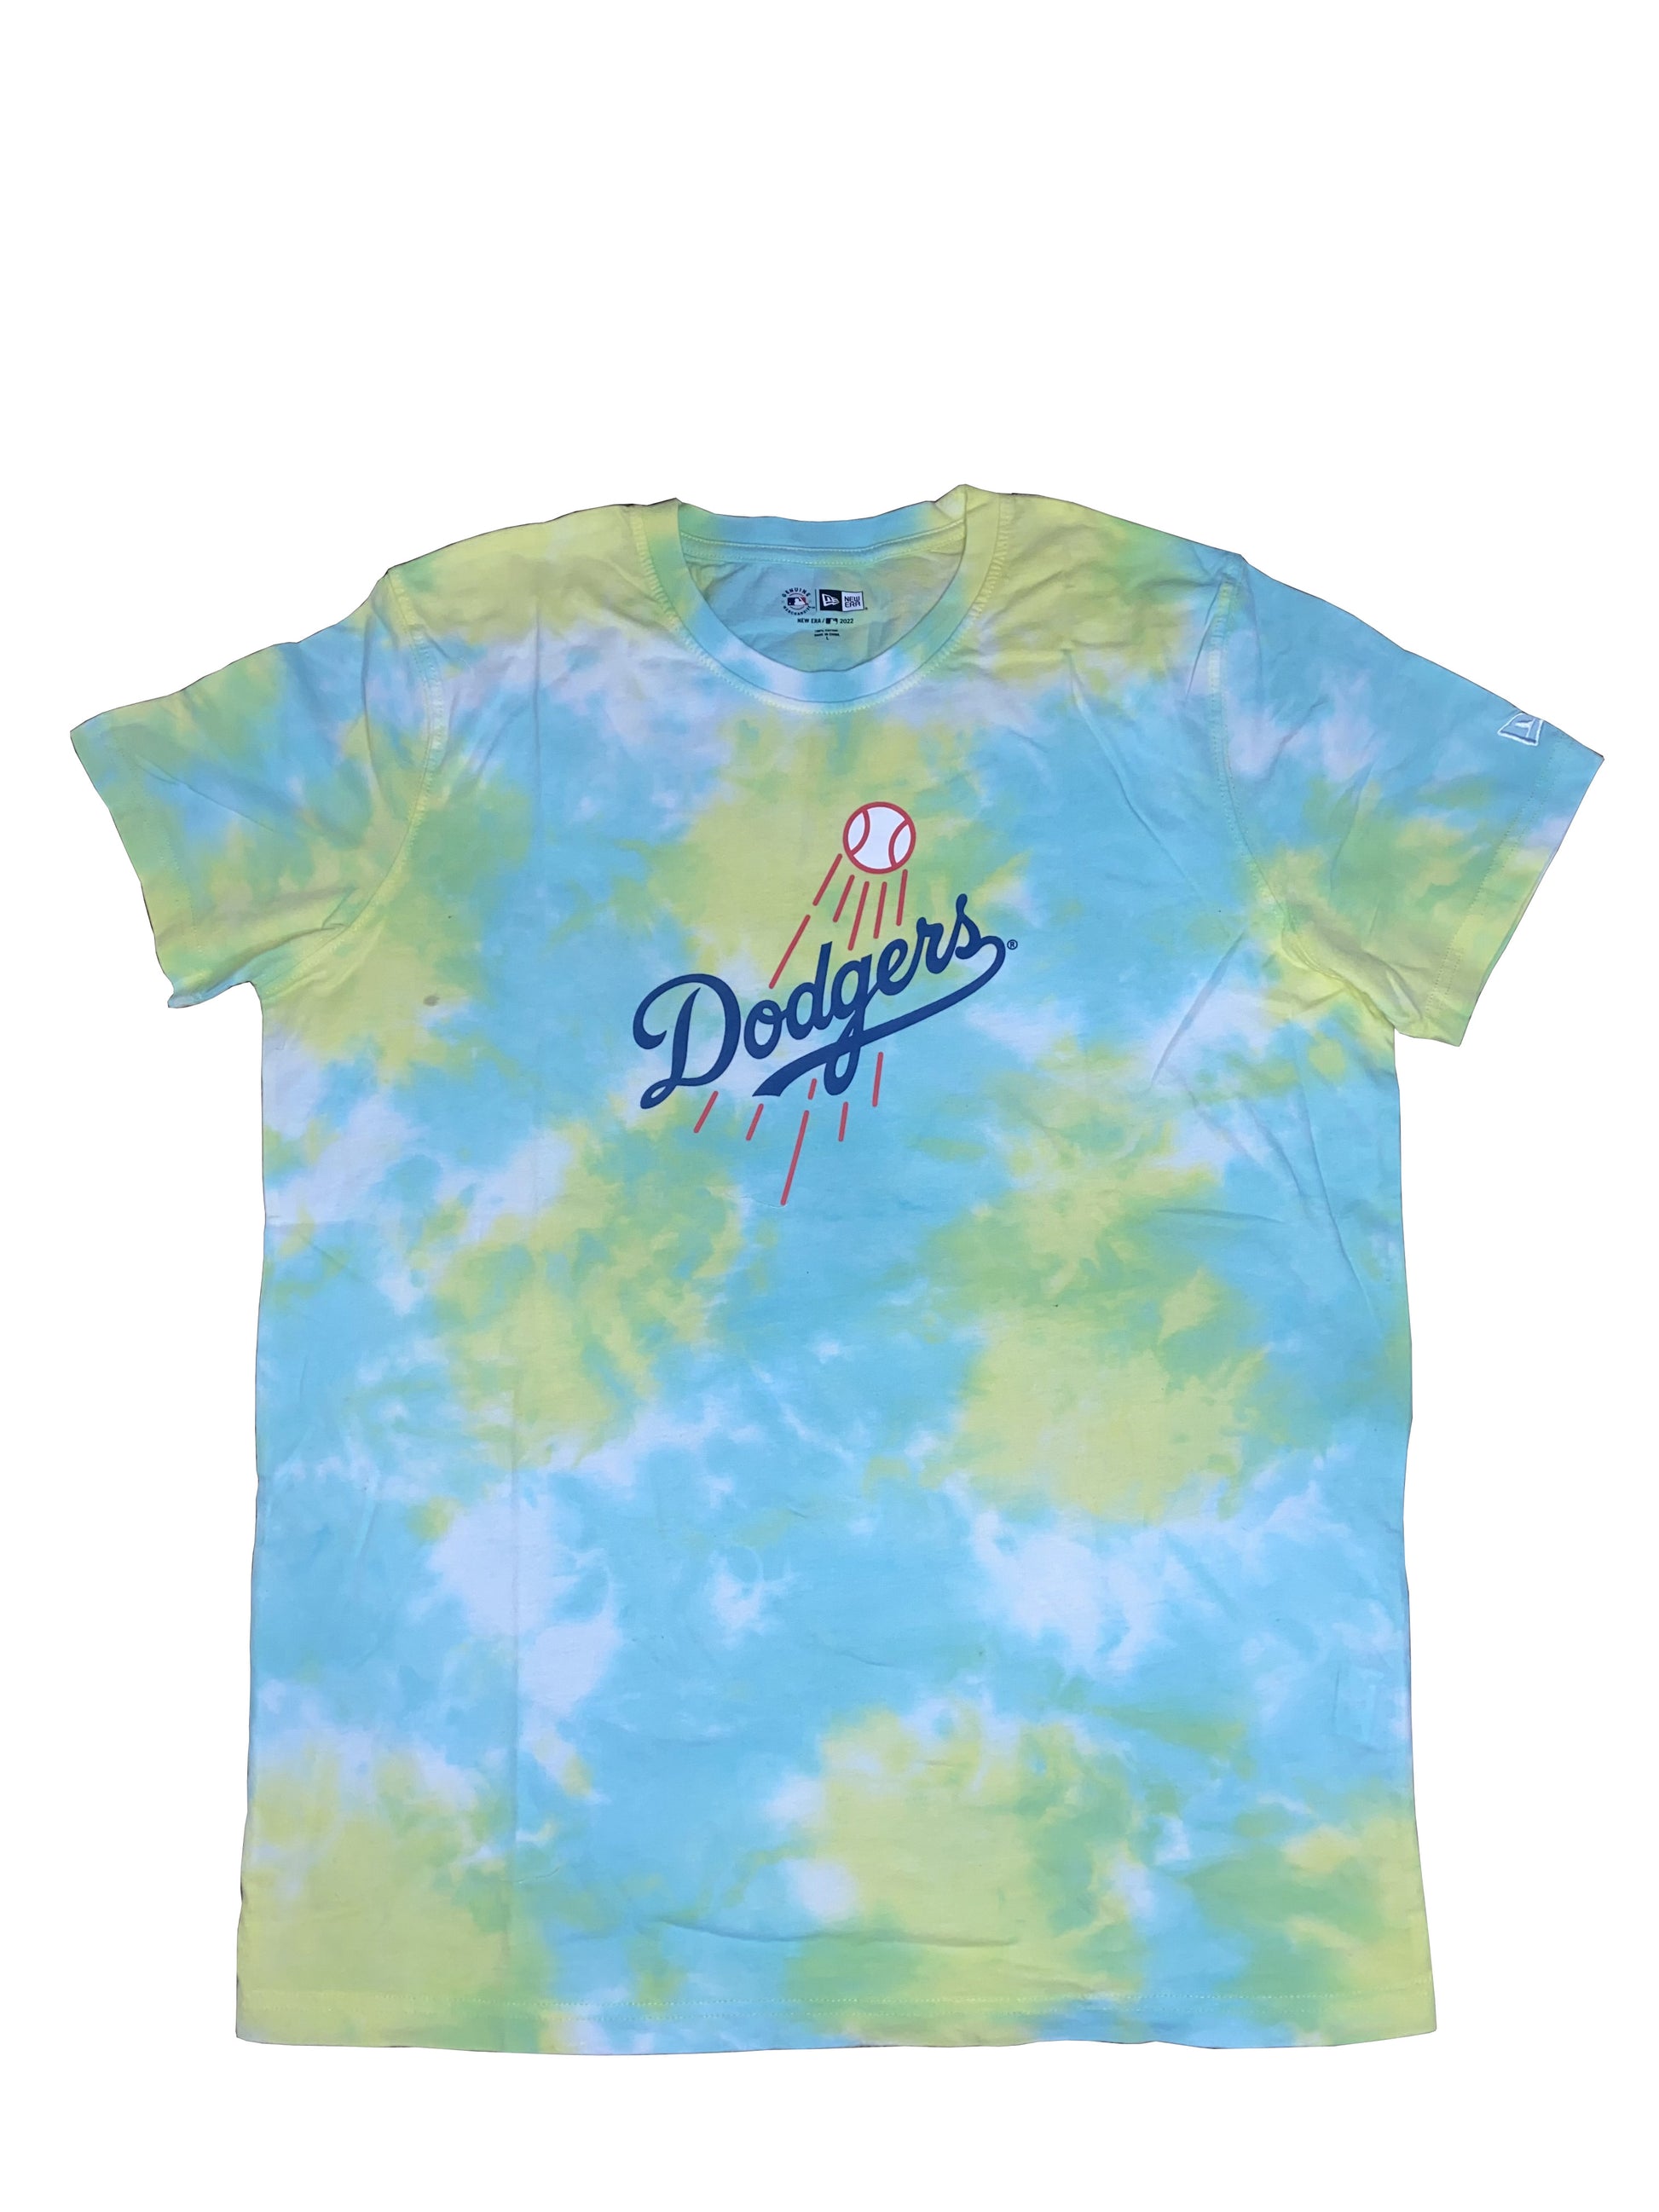 Phillies tie-dye t-shirt - officially licensed MLB